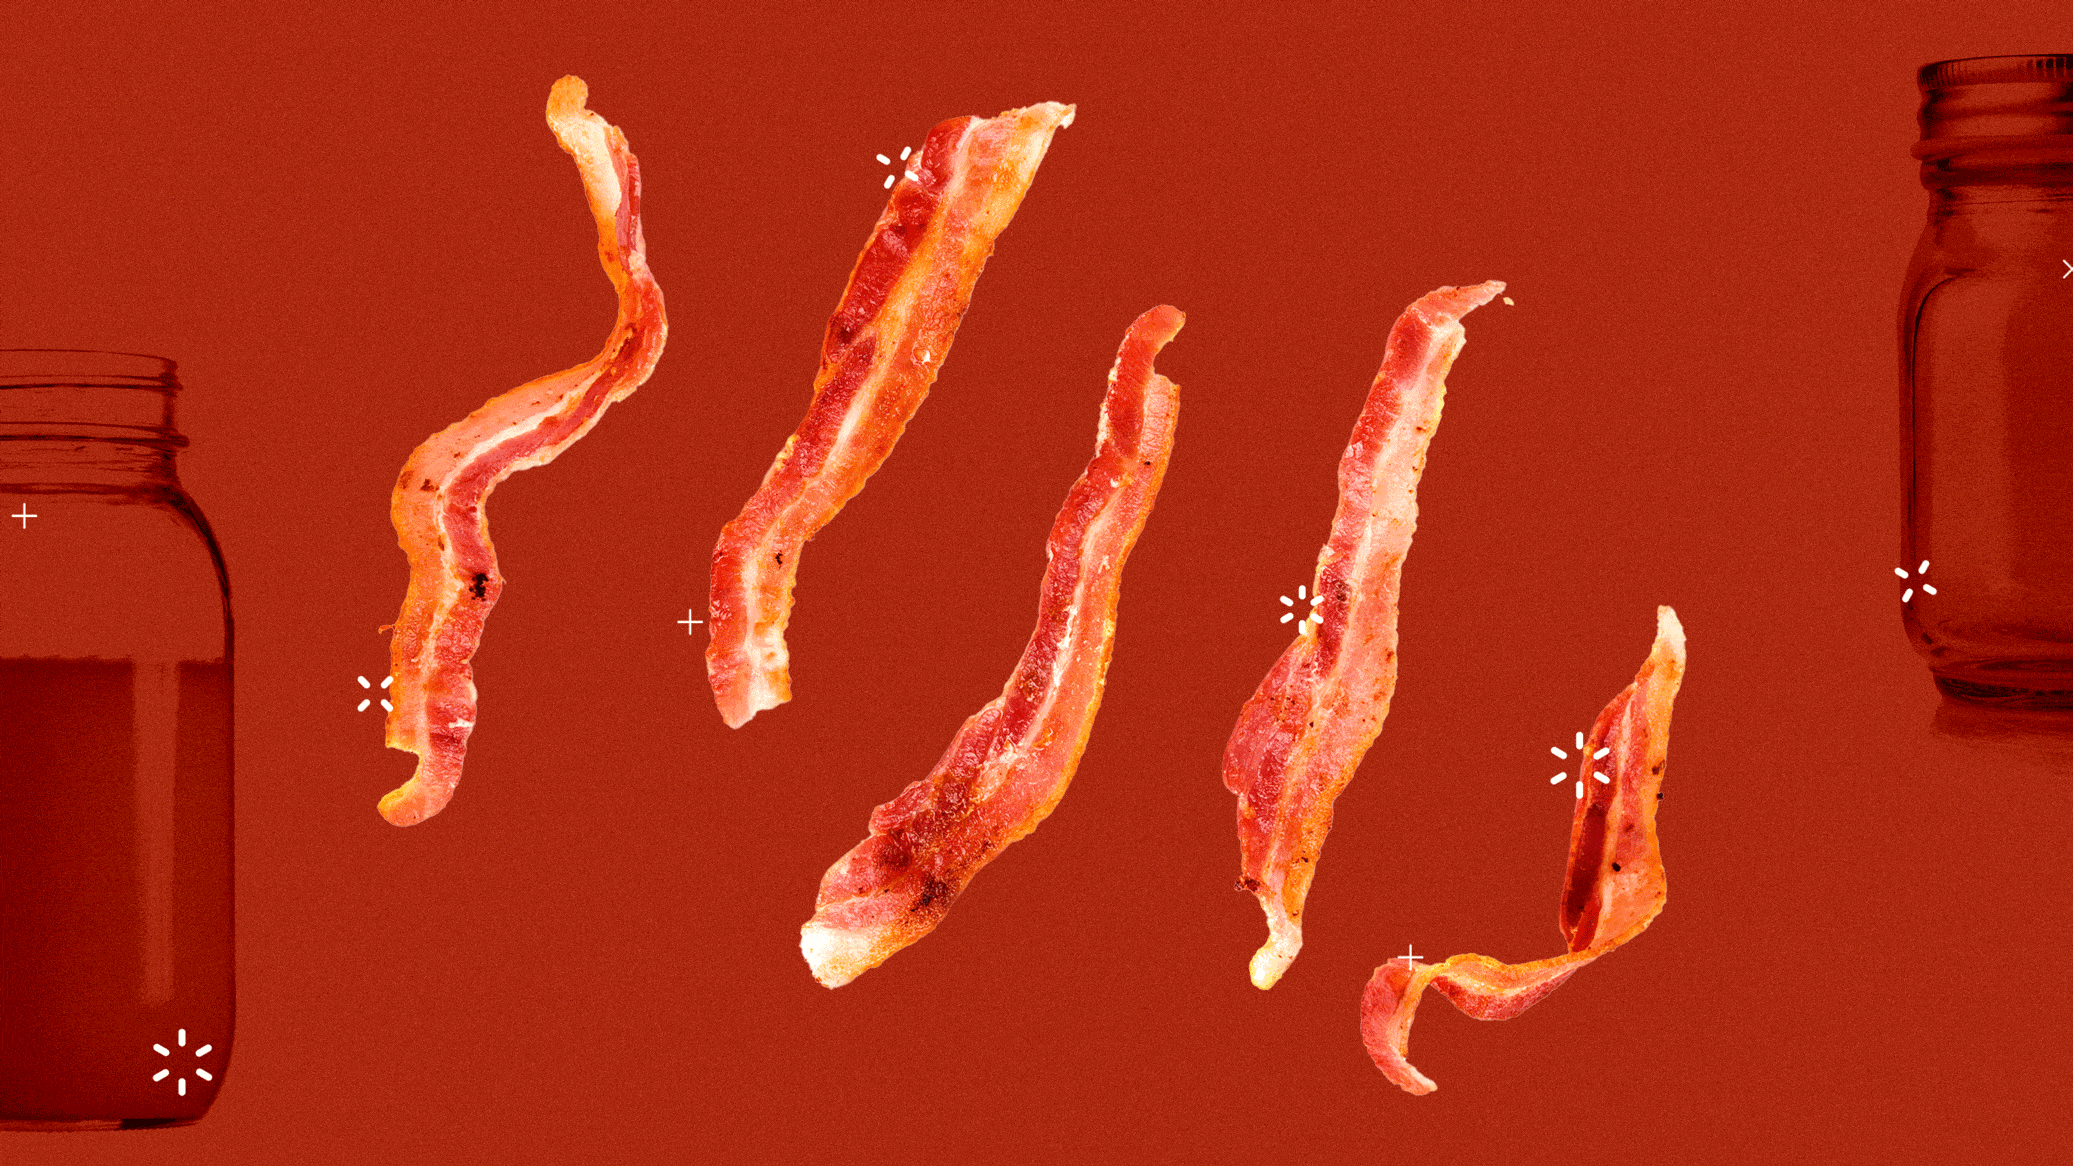 Is bacon bad for you?